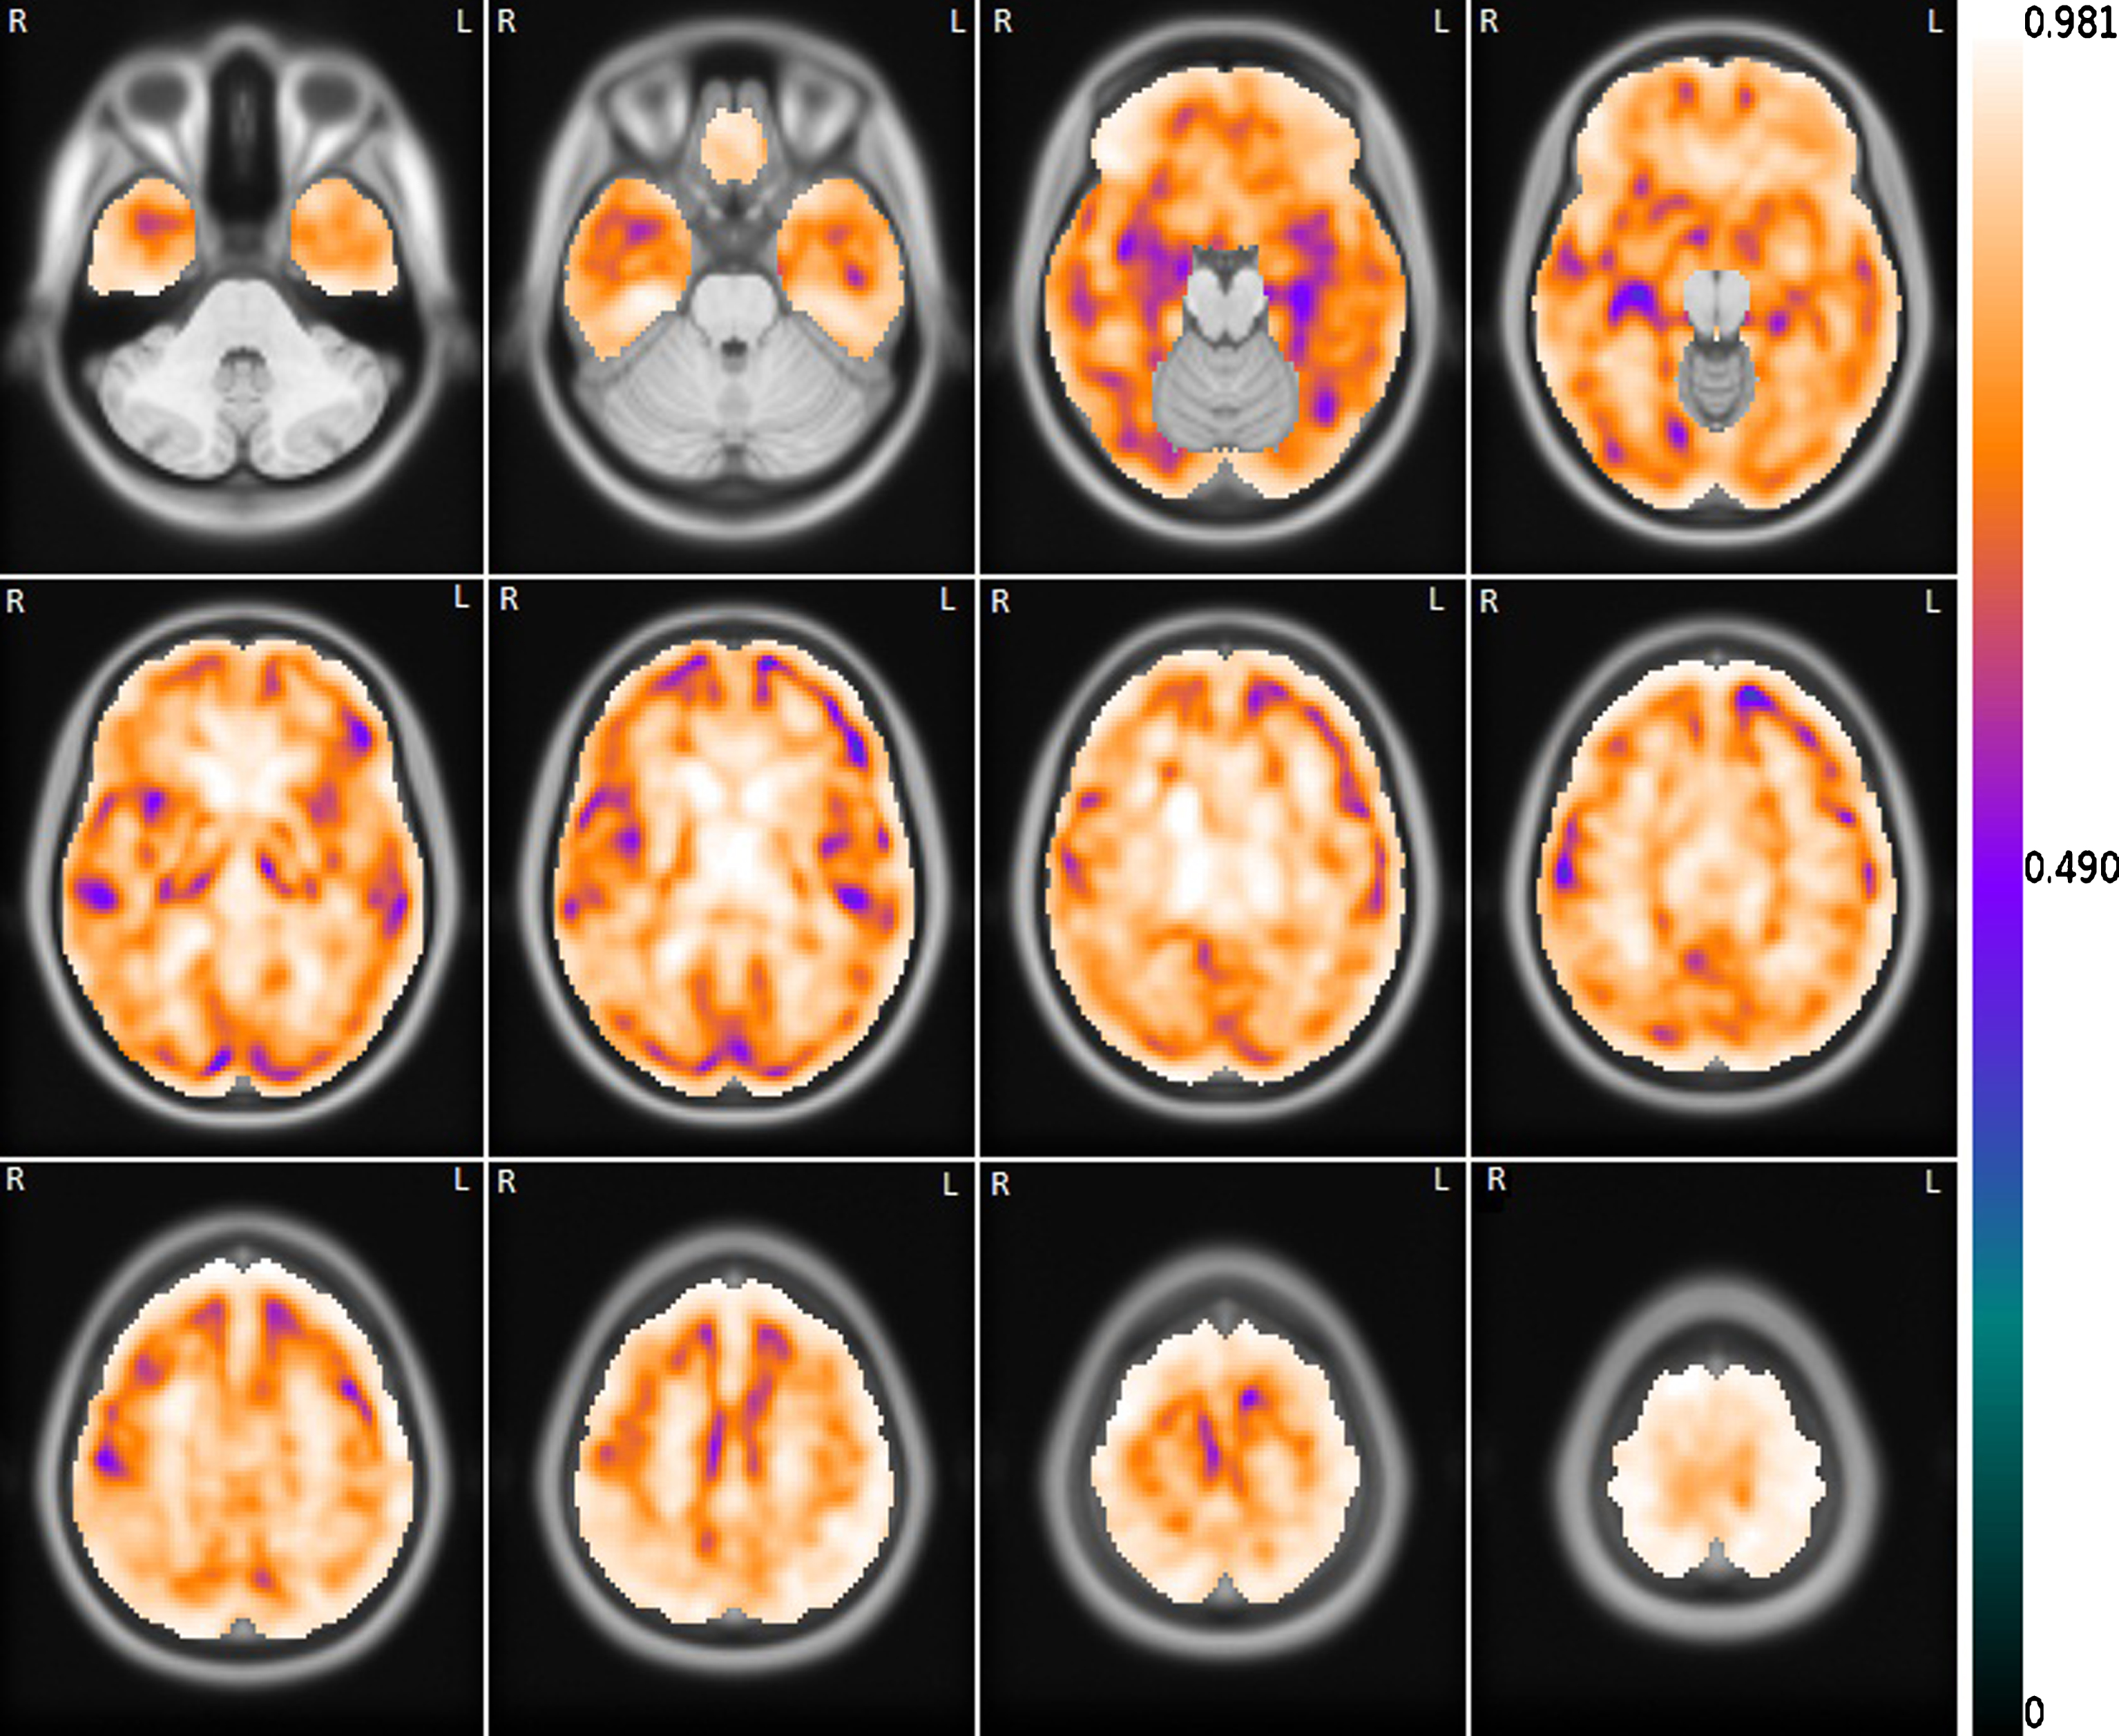 Mean voxelwise correlation between the set of FDG images and the correspondent set of R1(MRTM) images. The correlation image is overlapping the template MRI image.